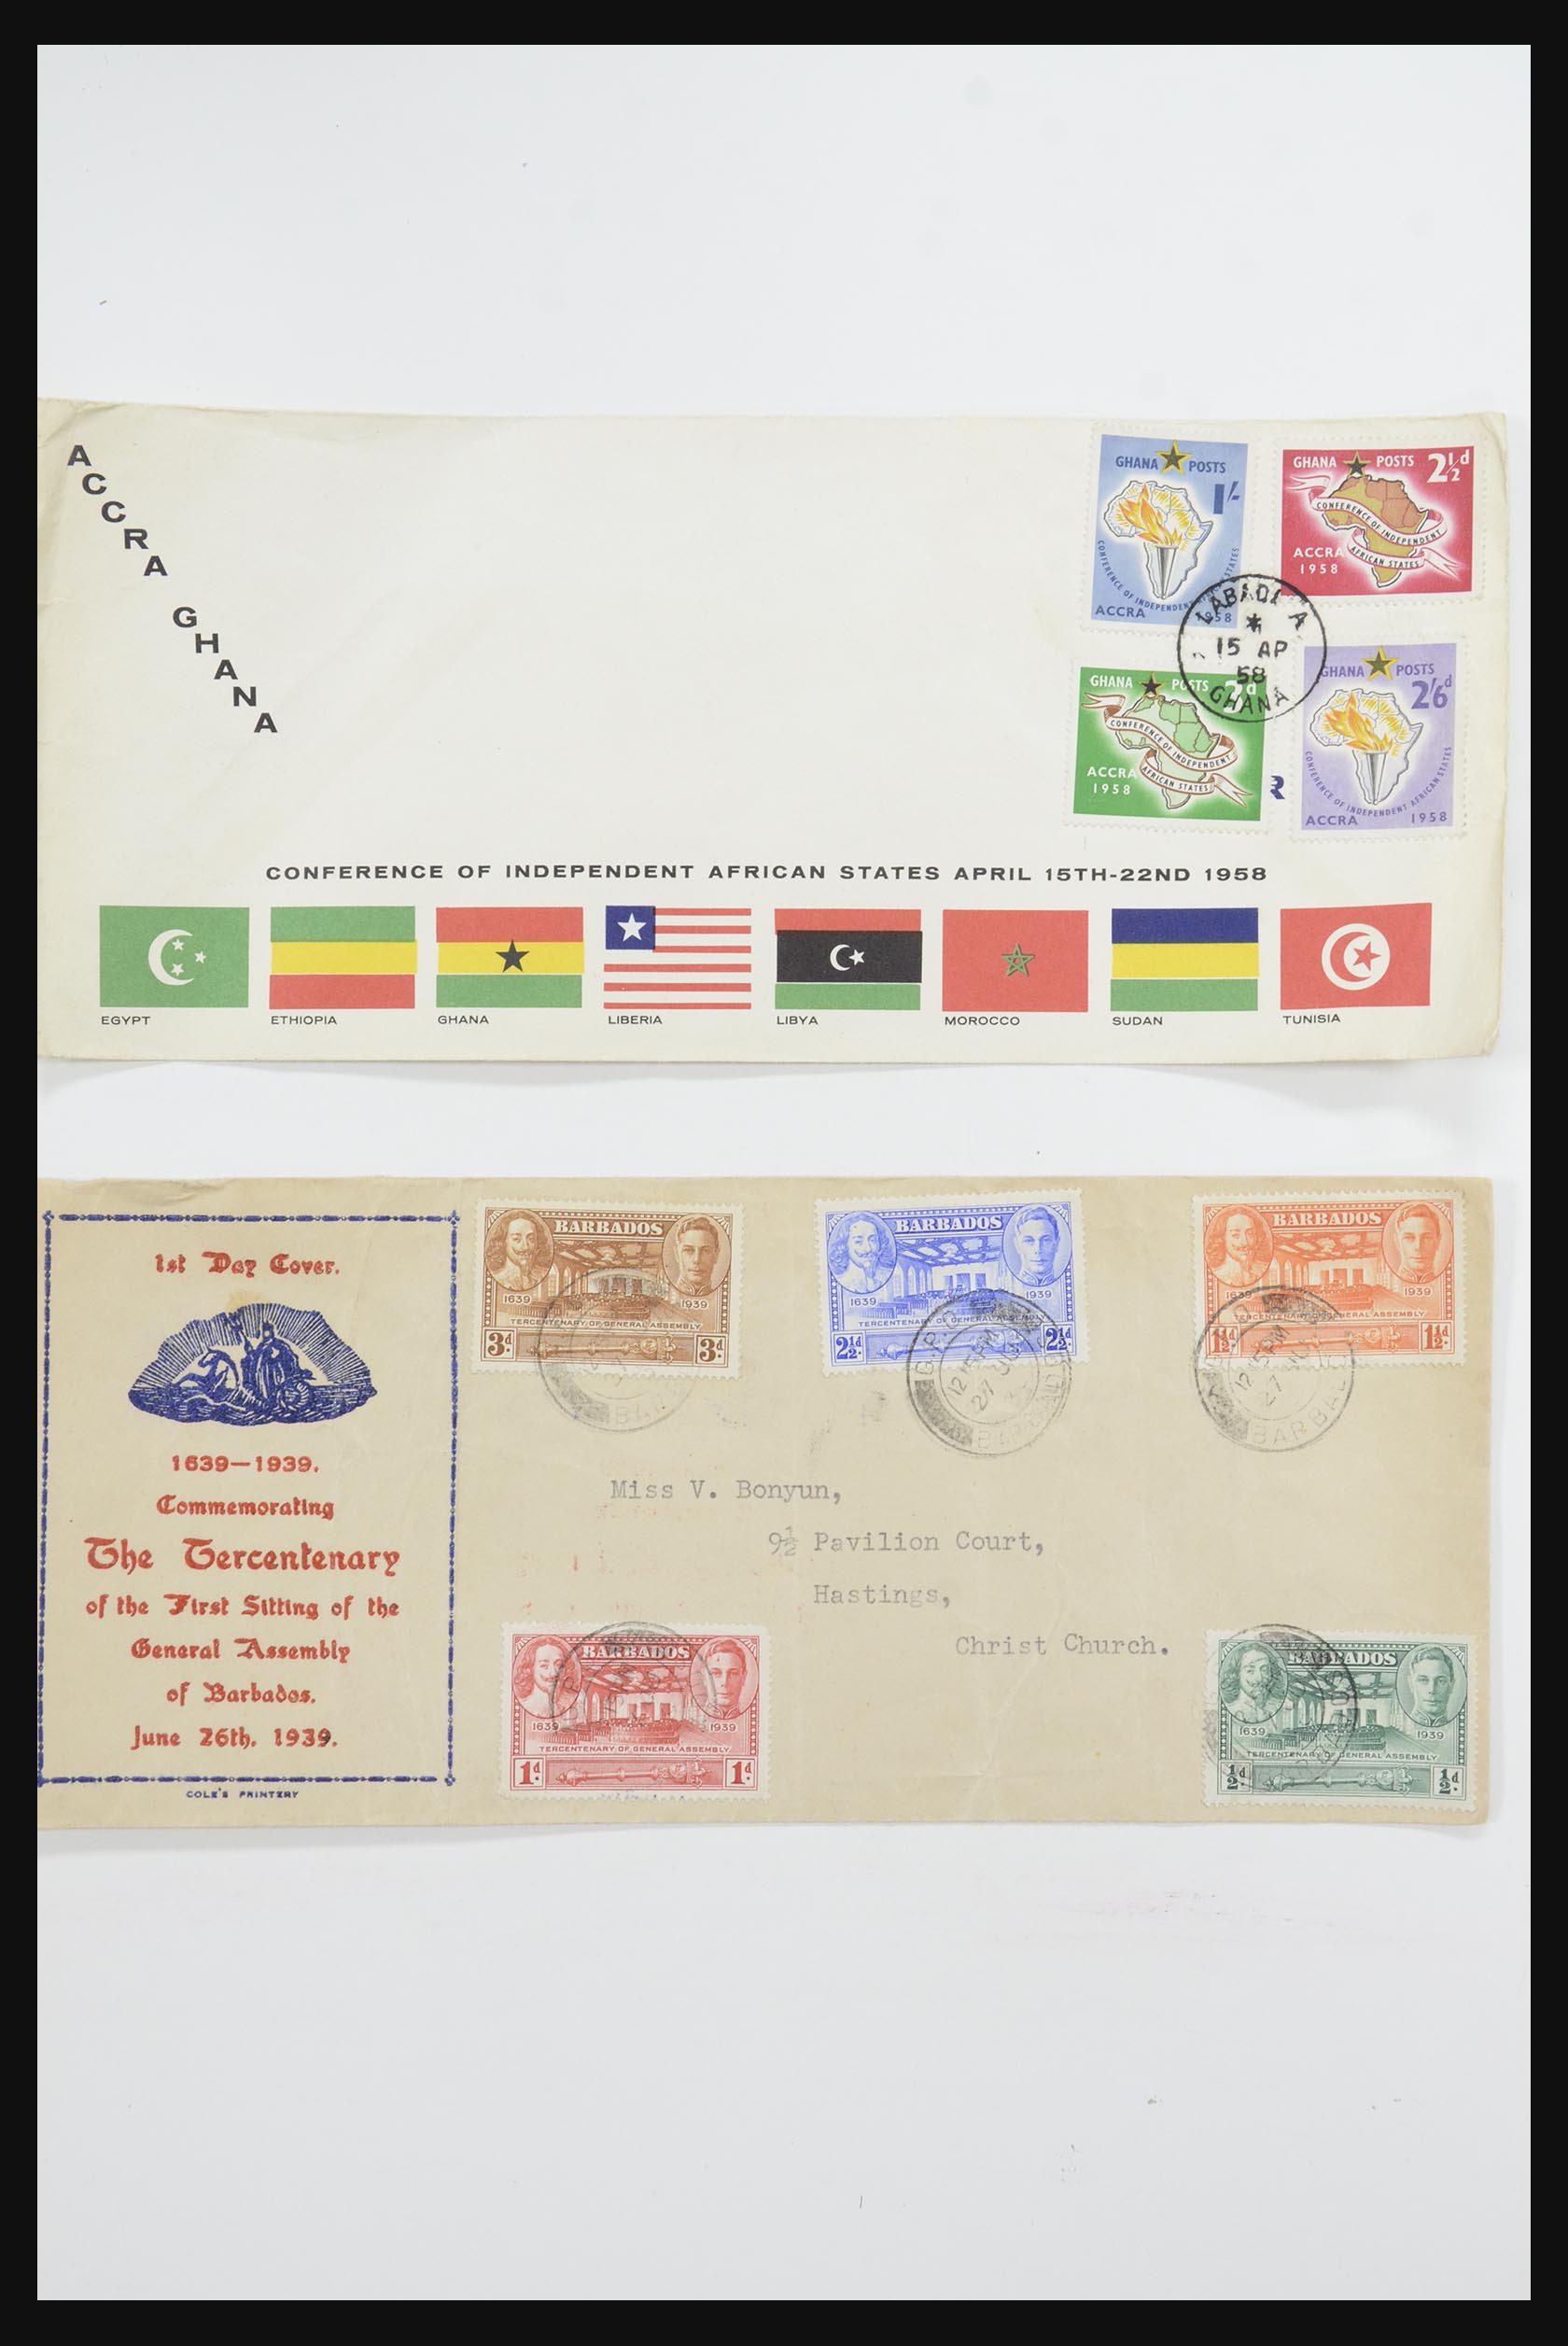 31726 050 - 31726 Great Britain and colonies covers and FDC's 1937-2001.